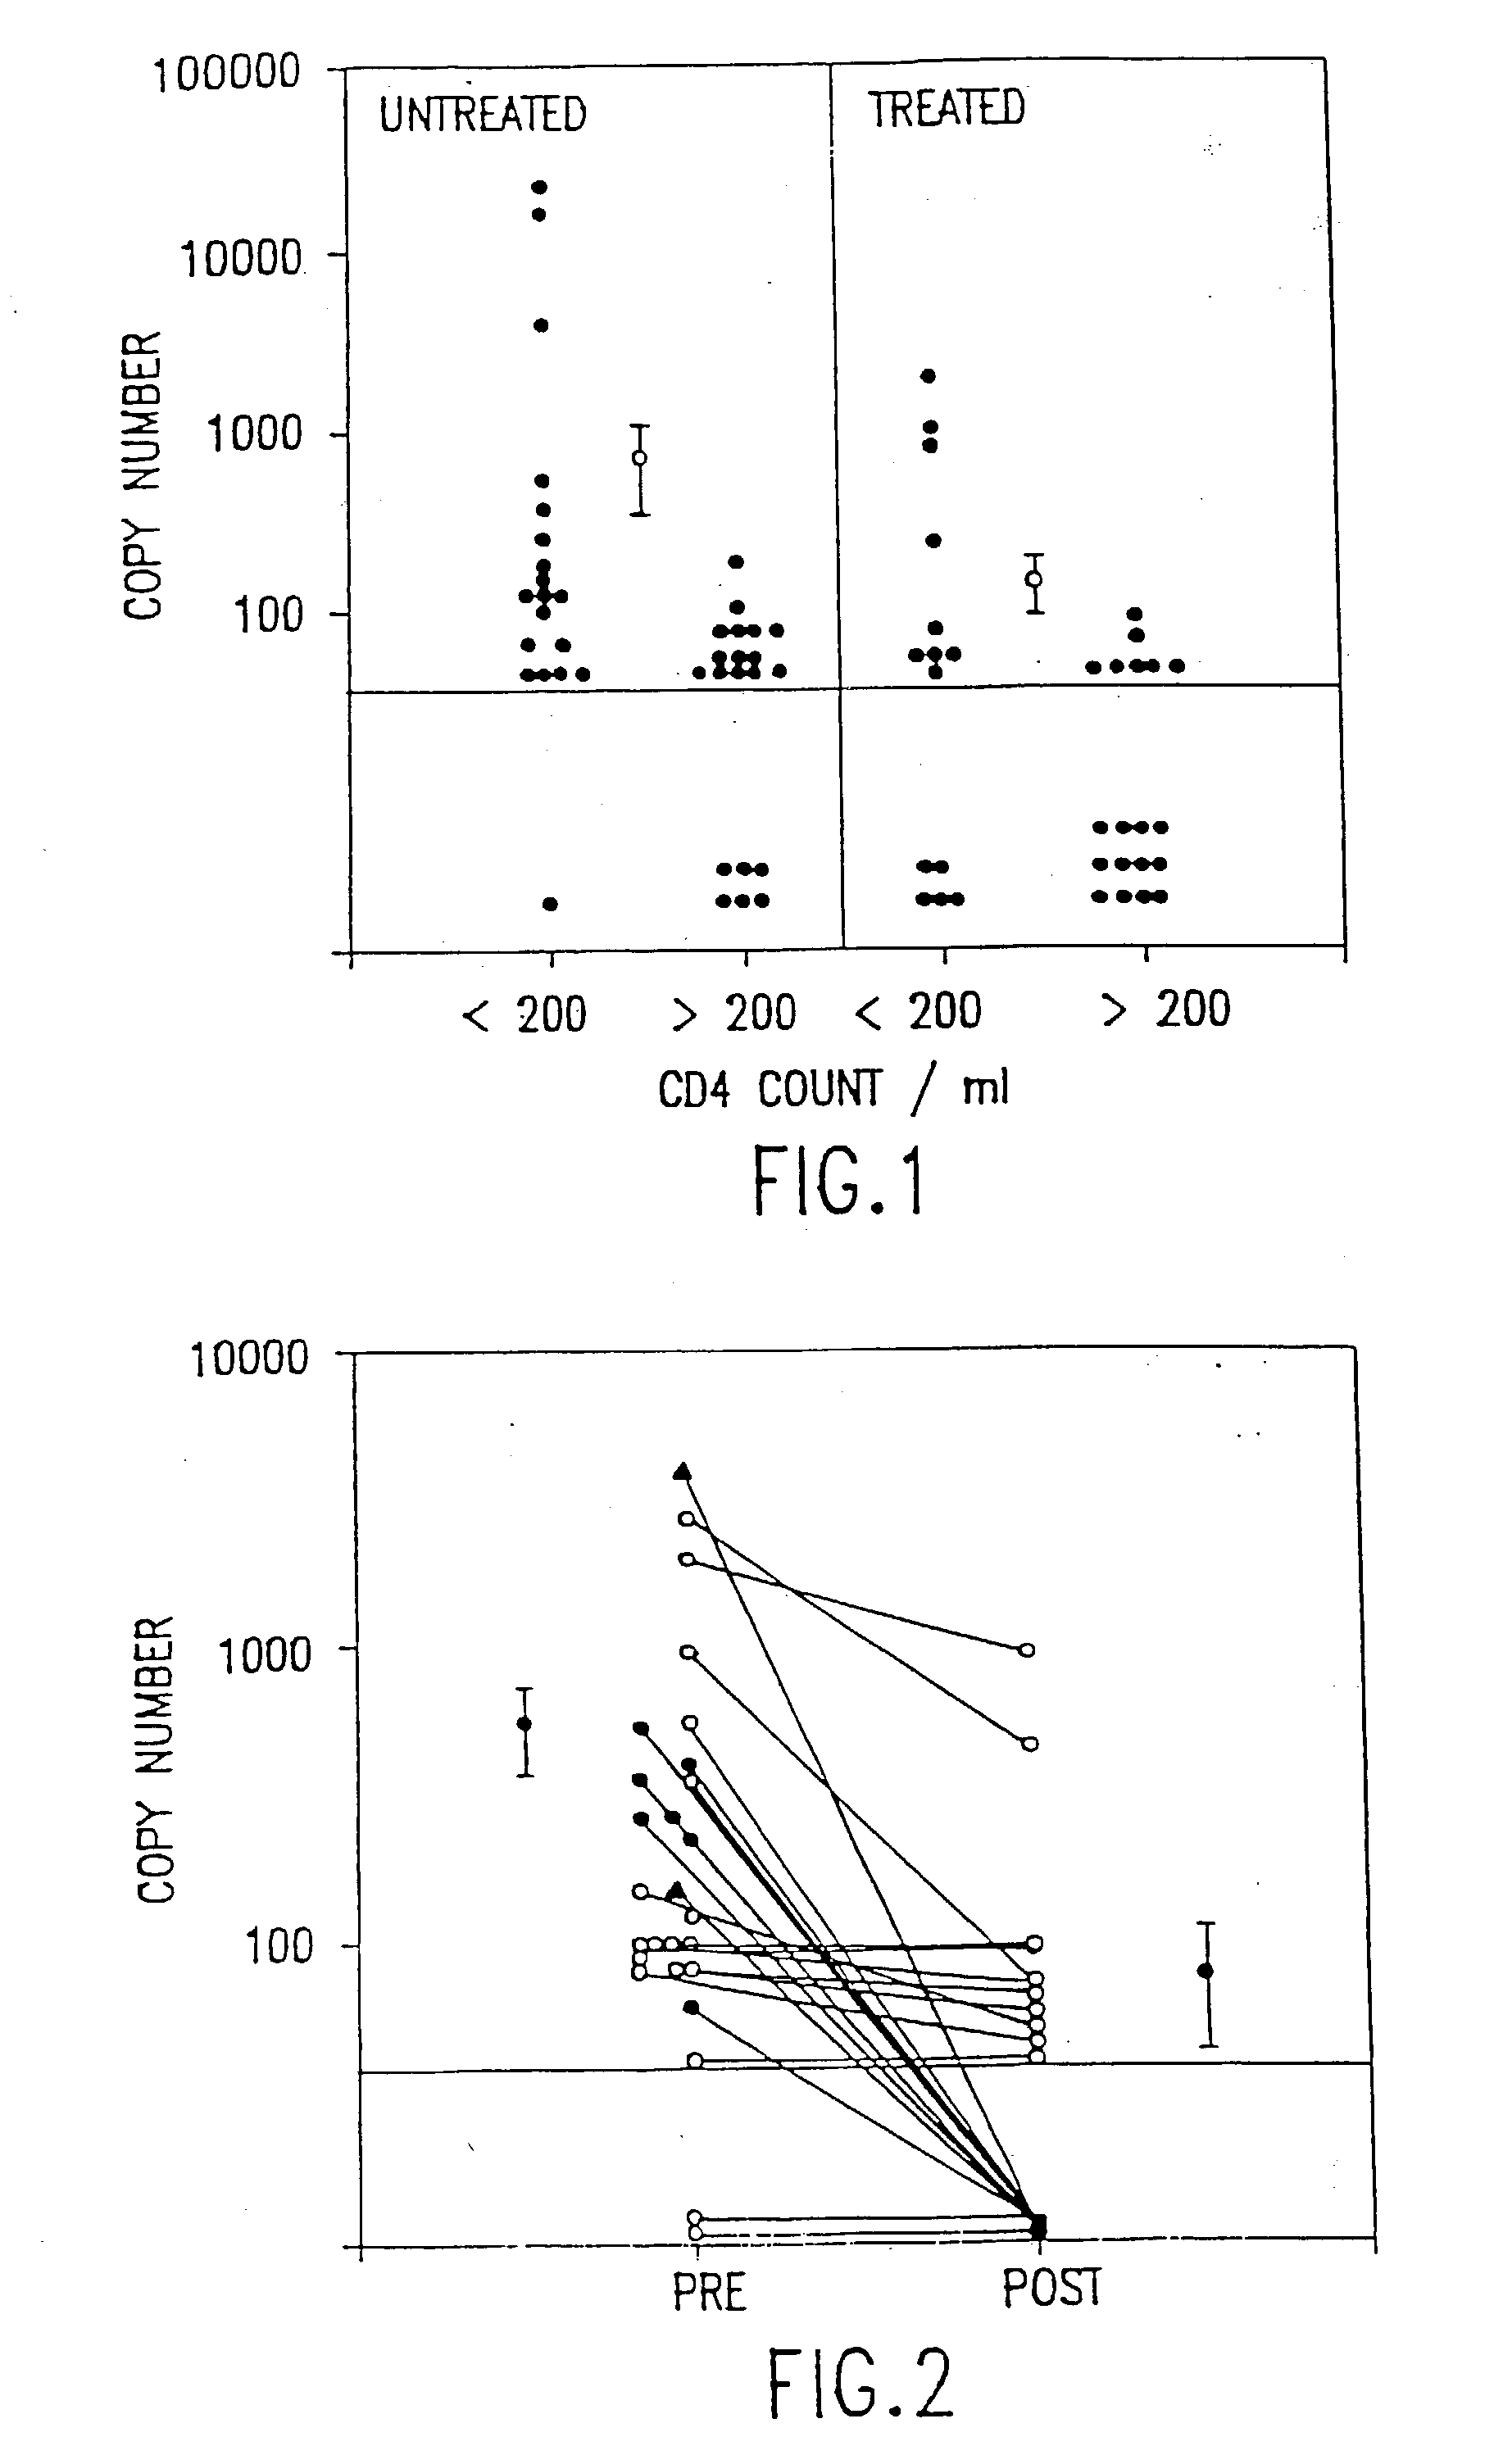 Polymerase chain reaction assays for monitoring antiviral therapy and making therapeutic decisions in the treatment of acquired immunodeficiency syndrome